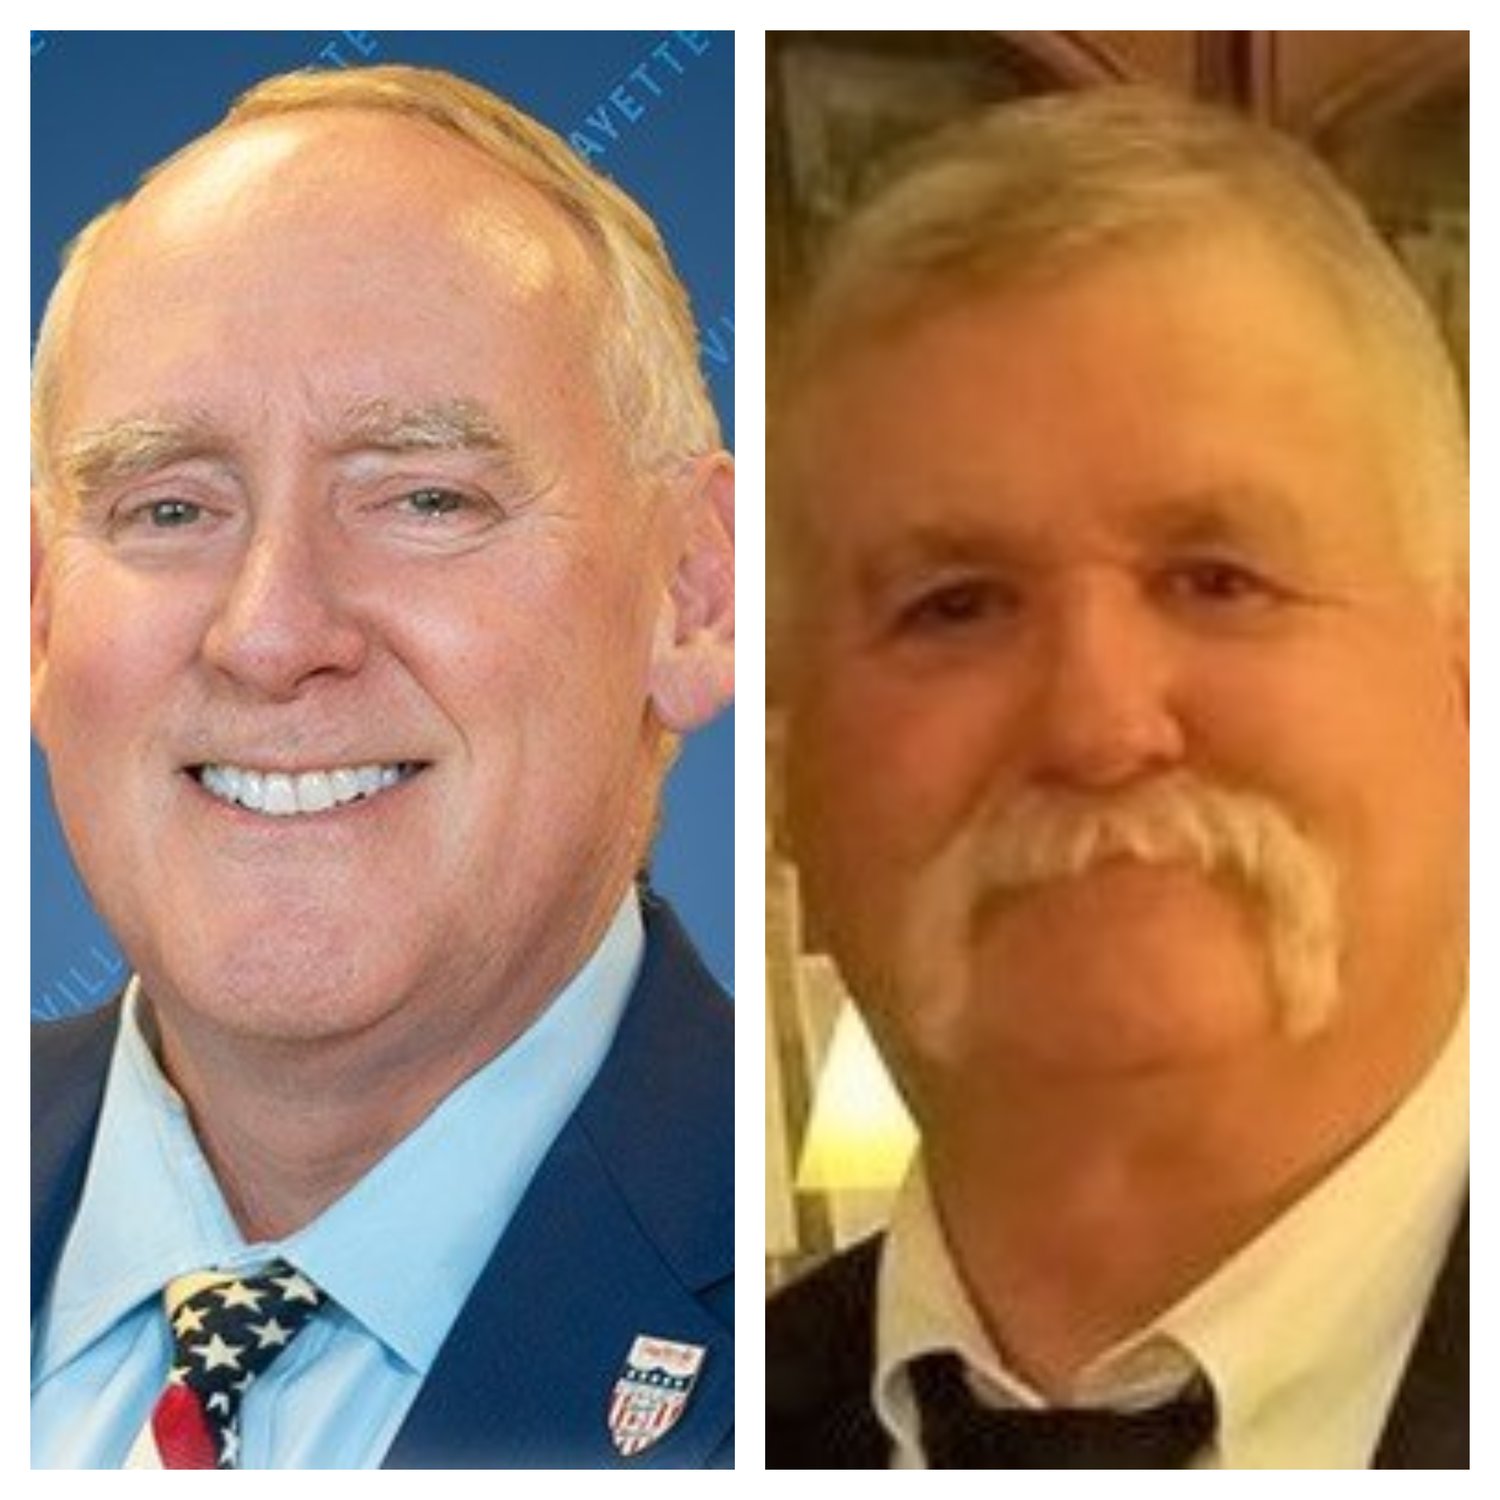 Fayetteville City Council District 5 candidates Johnny Dawkins and Fred LaChance.